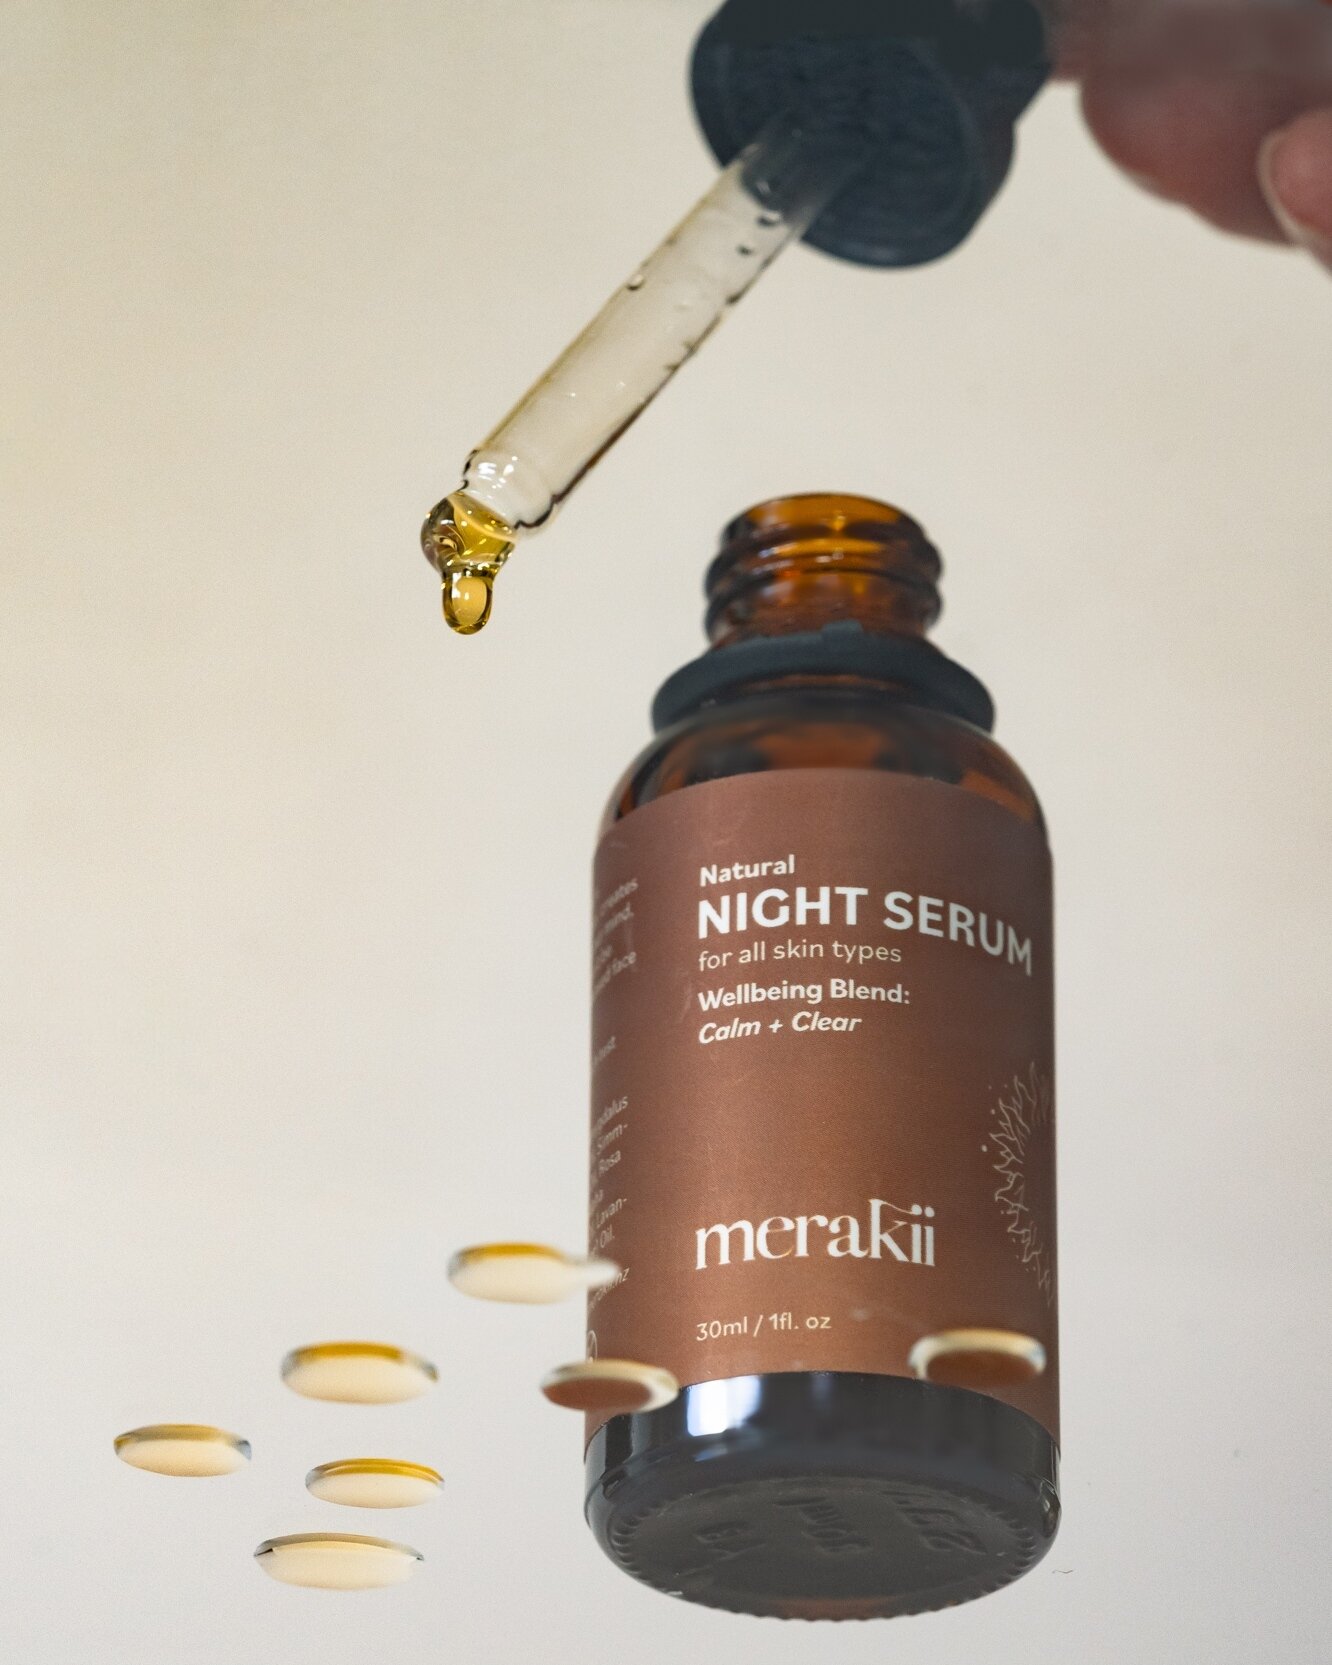 Drippin' in Gold! ✨ Our Calm + Clear Night Serum is the secret to a dreamy night's rest and glowing skin. 🌙💫 #MerakiiMagic #CalmAndClear⁠
⁠
⁠
⁠
#skincare #natural #nz #mindhealth #faceserum #merakii #hydratedskin #wellbeing #mind #body #soul #selfl